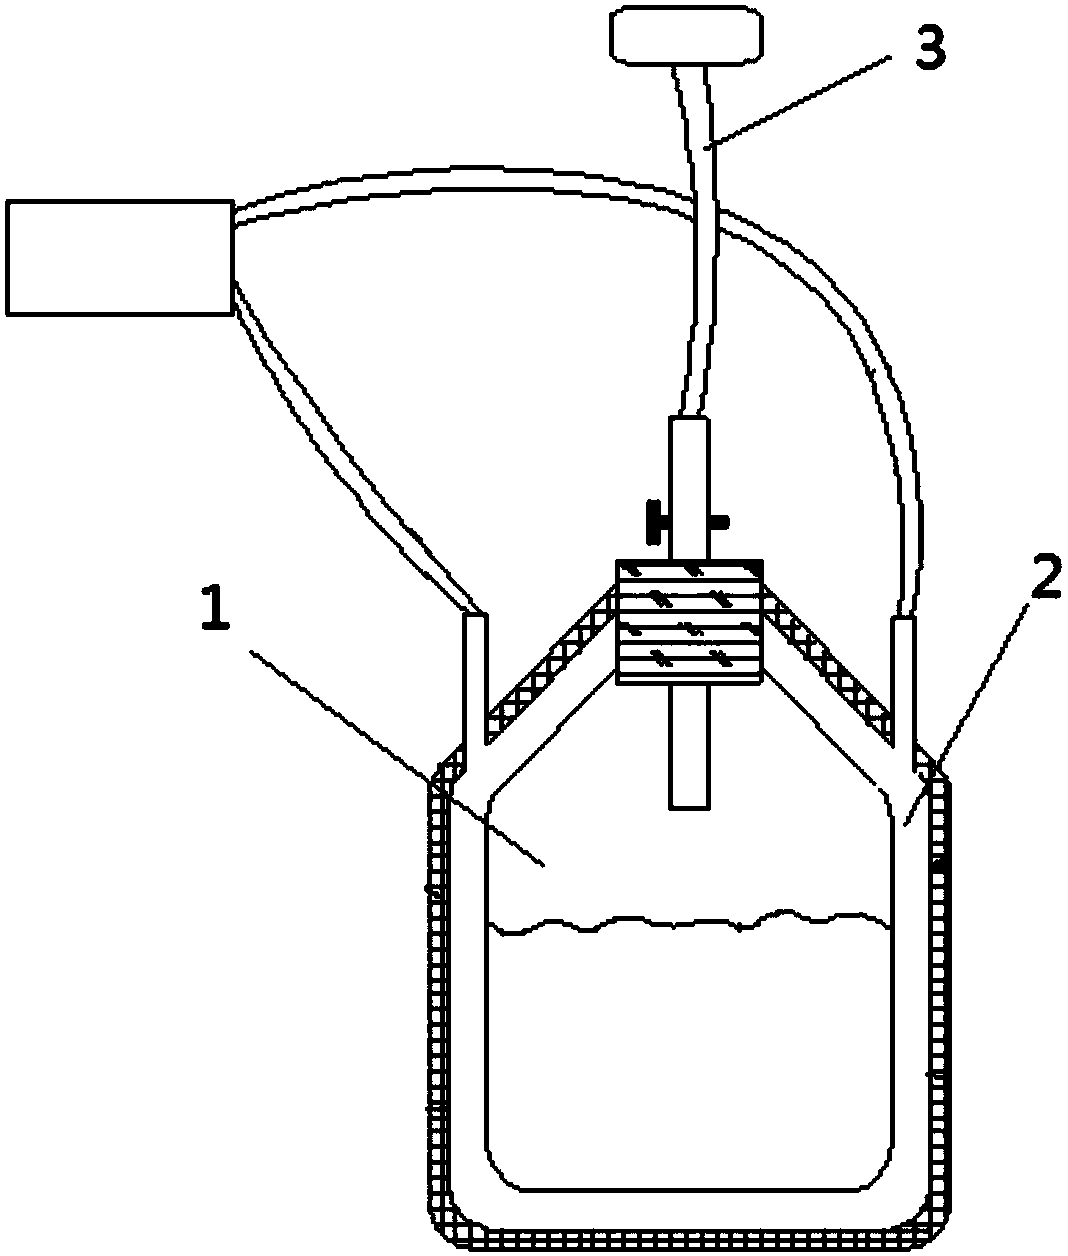 System used for pretreating crop straw